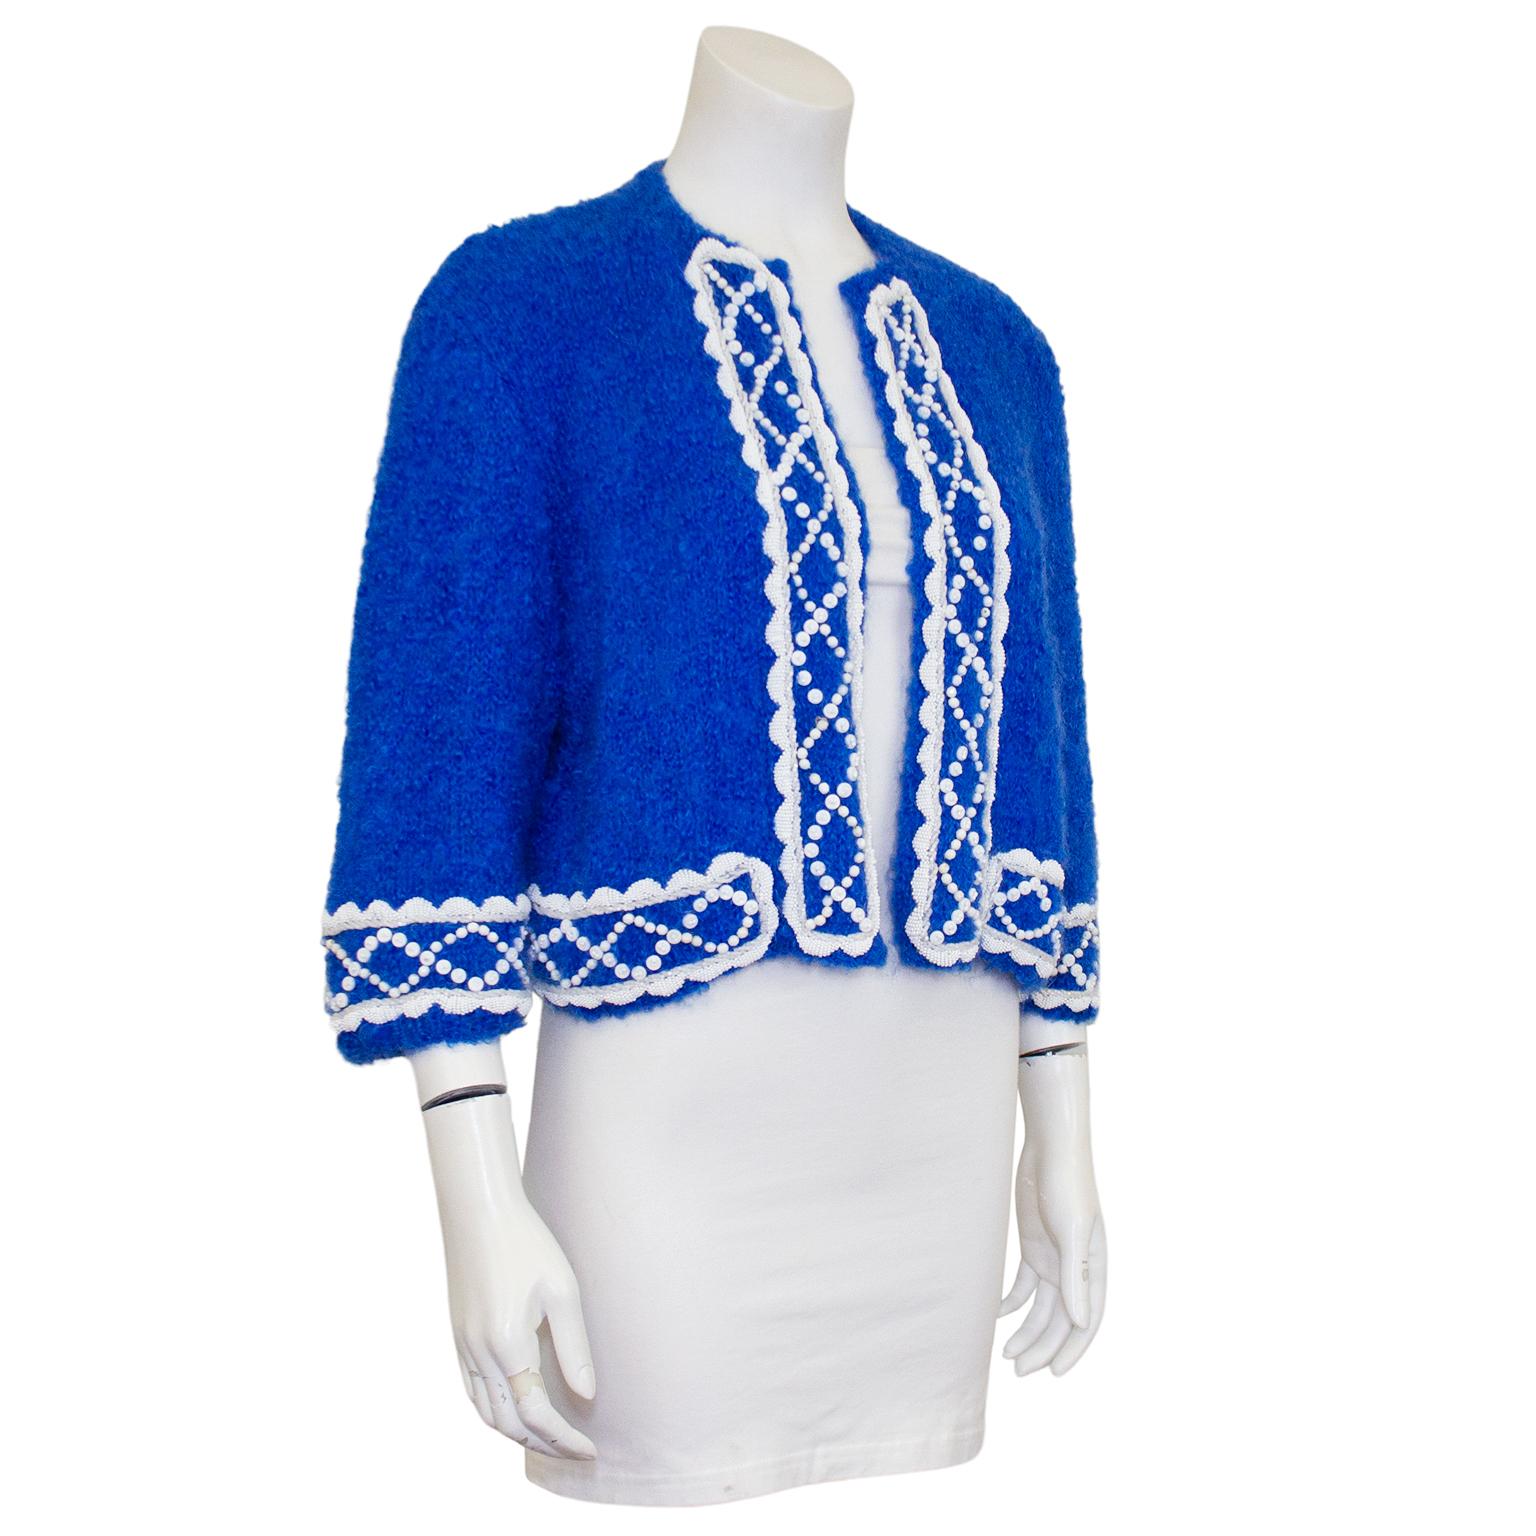 1960's custom knit royal blue mohair bolero cardigan. The perfect added touch for your summer cottons. 1960's custom knit mohair 3/4 sleeve bolero with white hand sewn beaded trim. This was an extremely skilled knitter who showcased her talents on